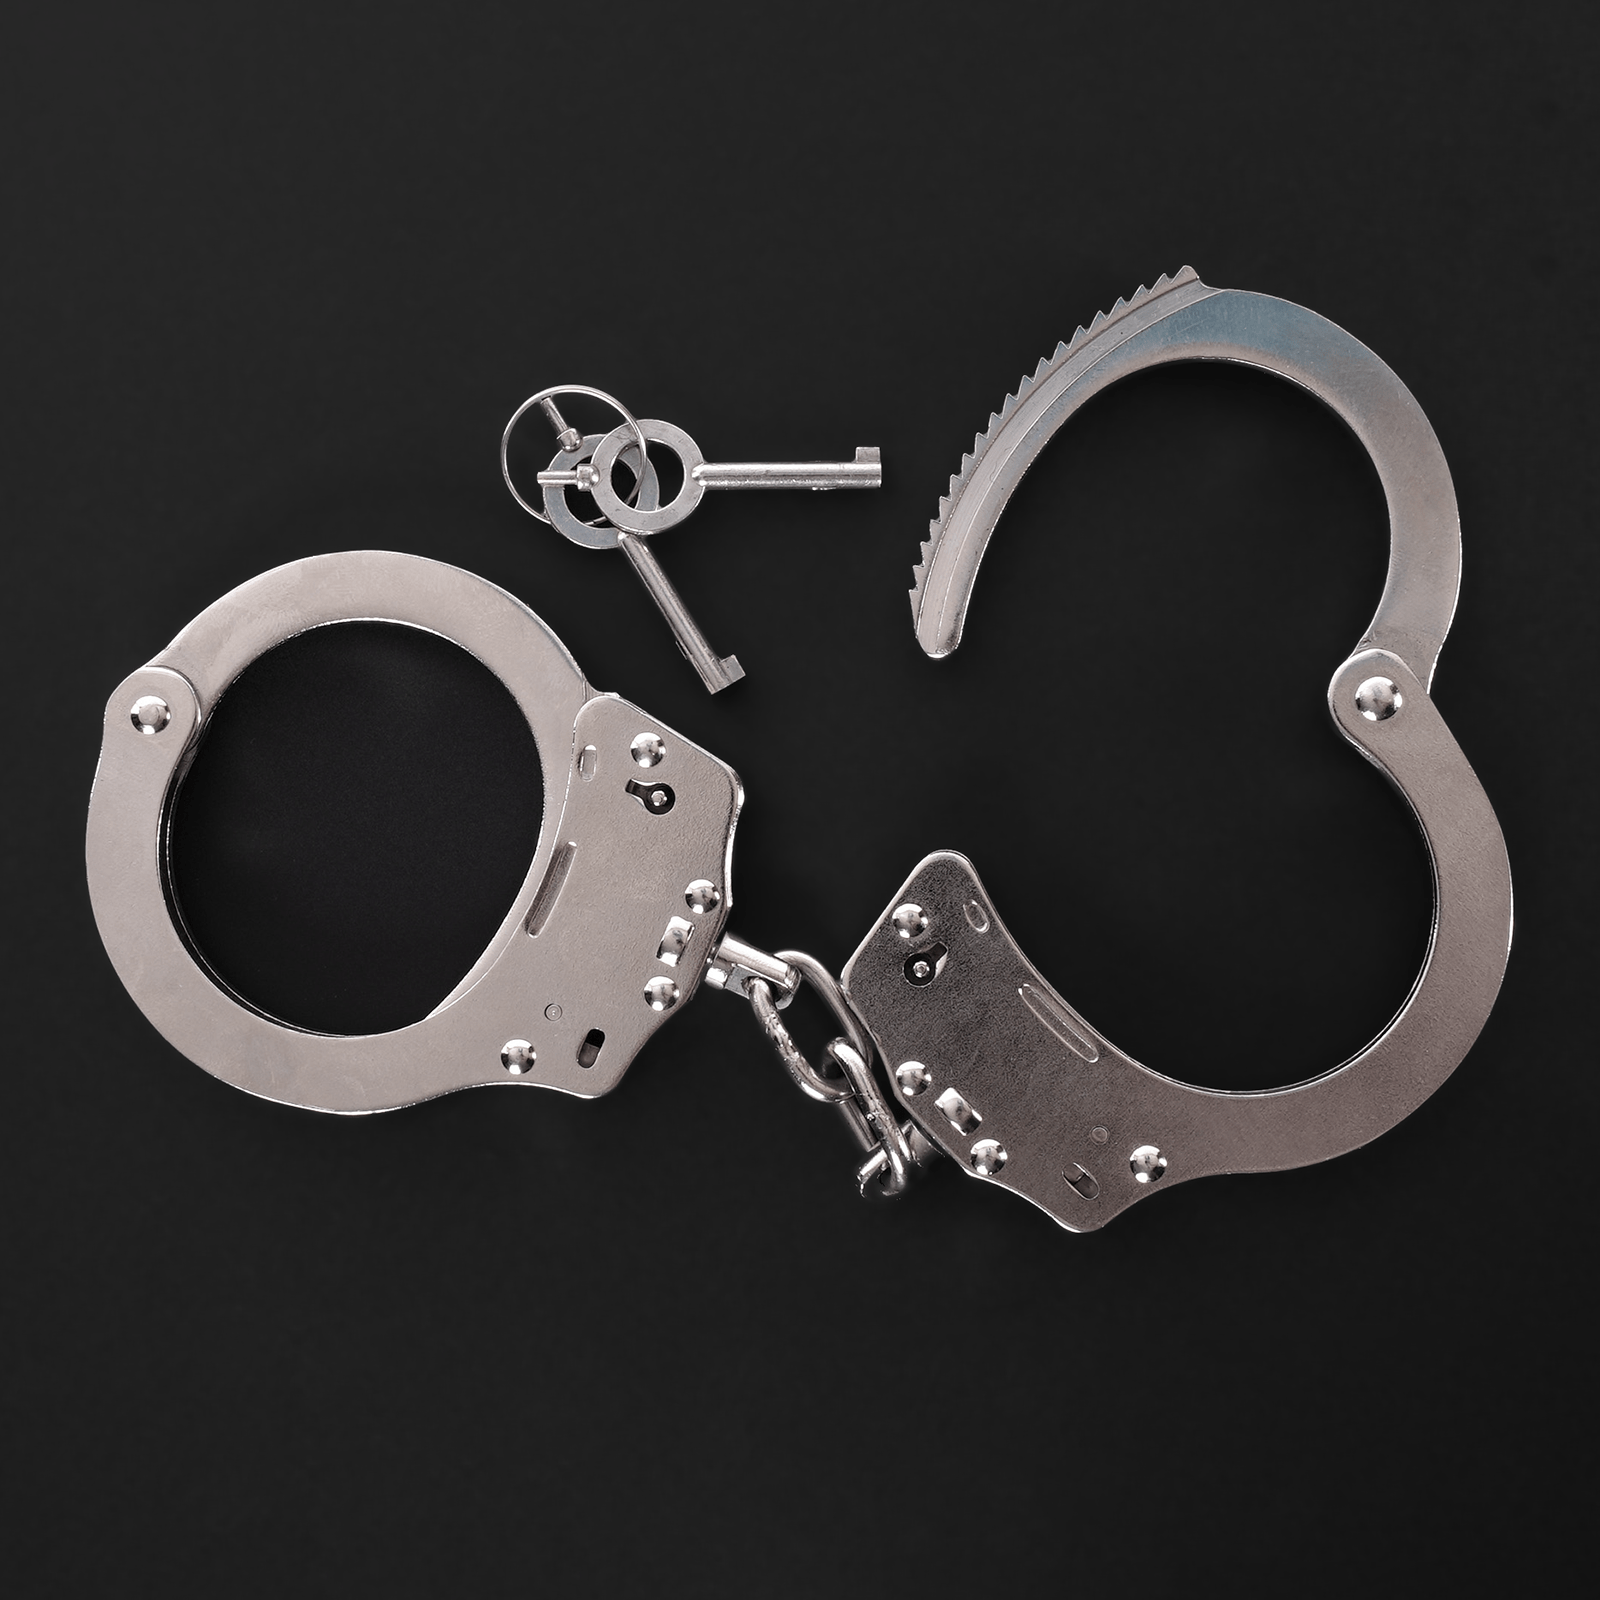 Core By Kink Police-Style Metal Handcuffs - Kink Store